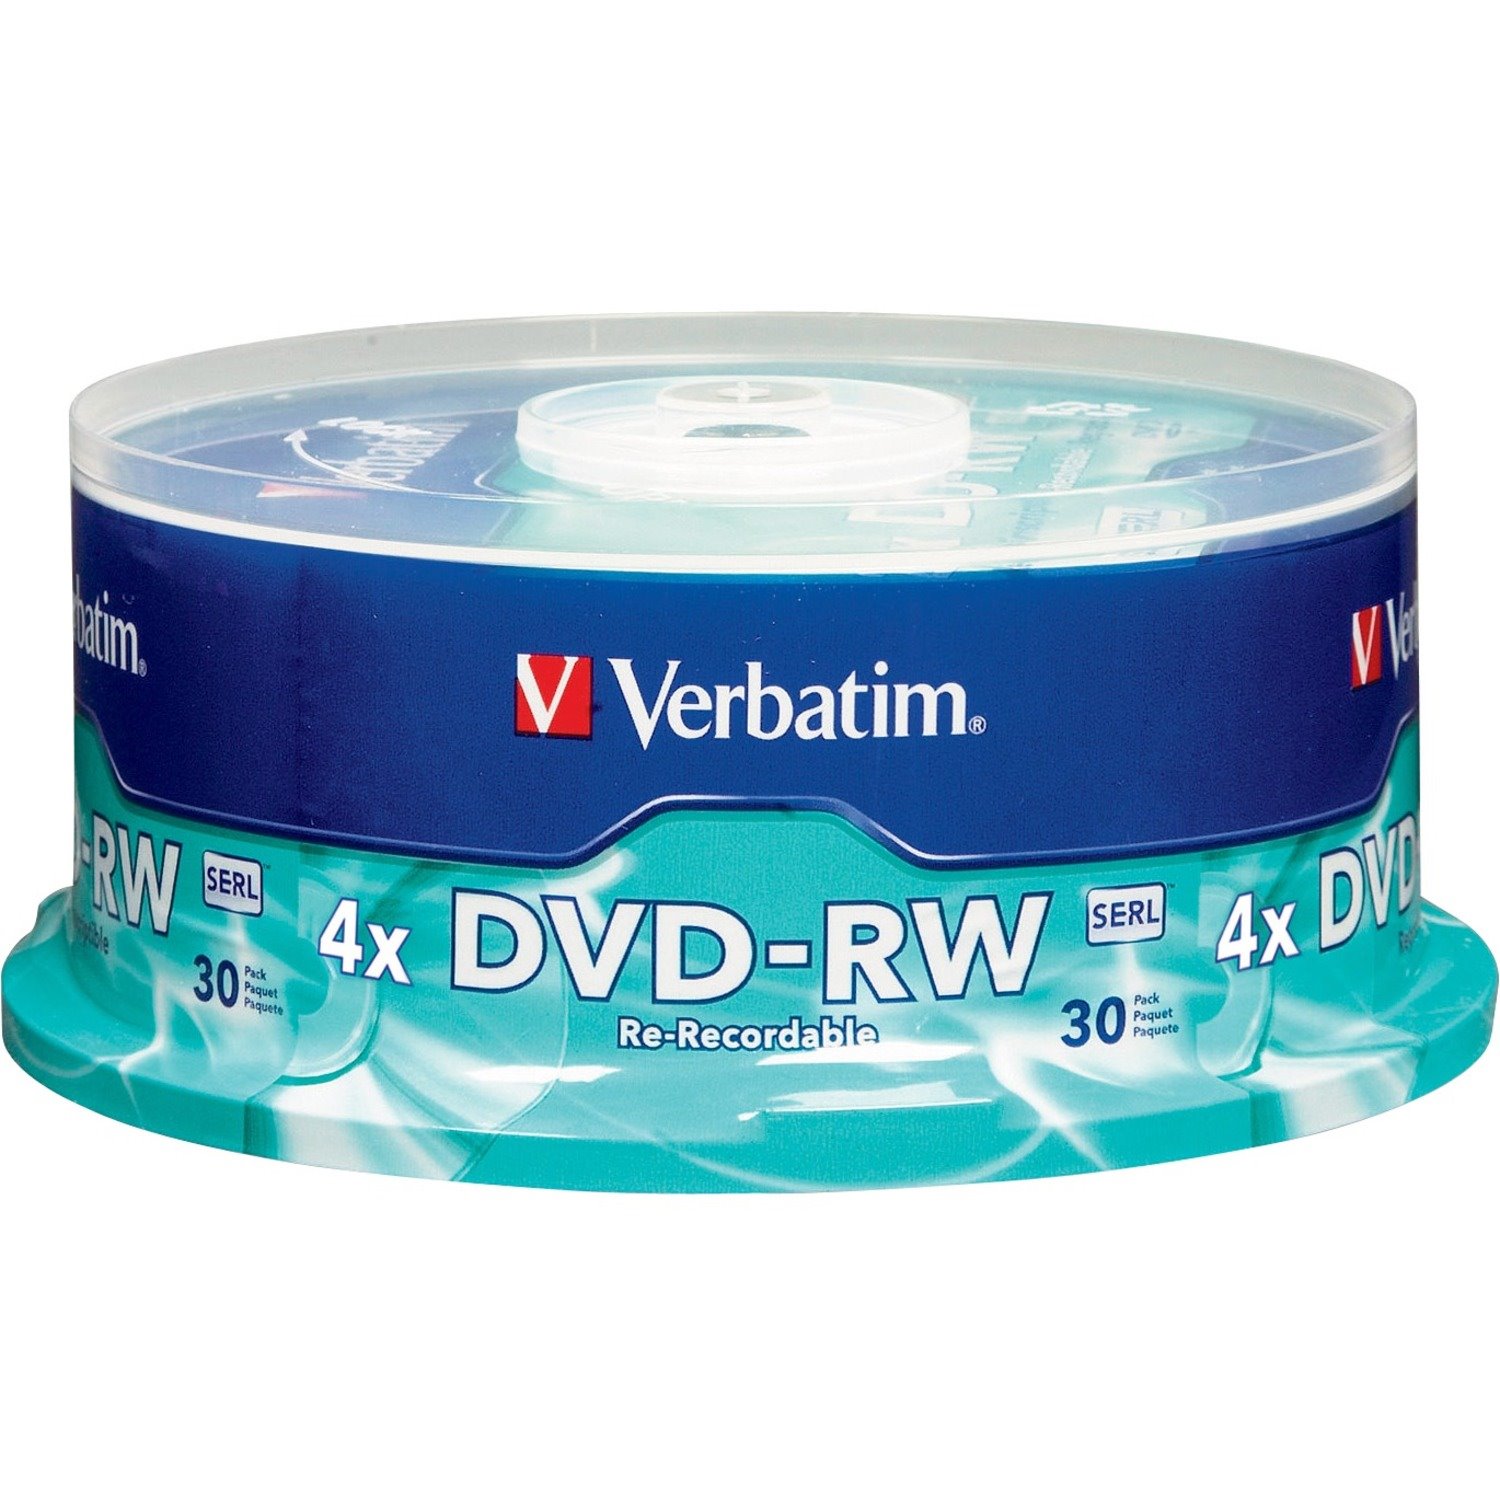 Verbatim DVD-RW 4.7GB 4X with Branded Surface - 30pk Spindle